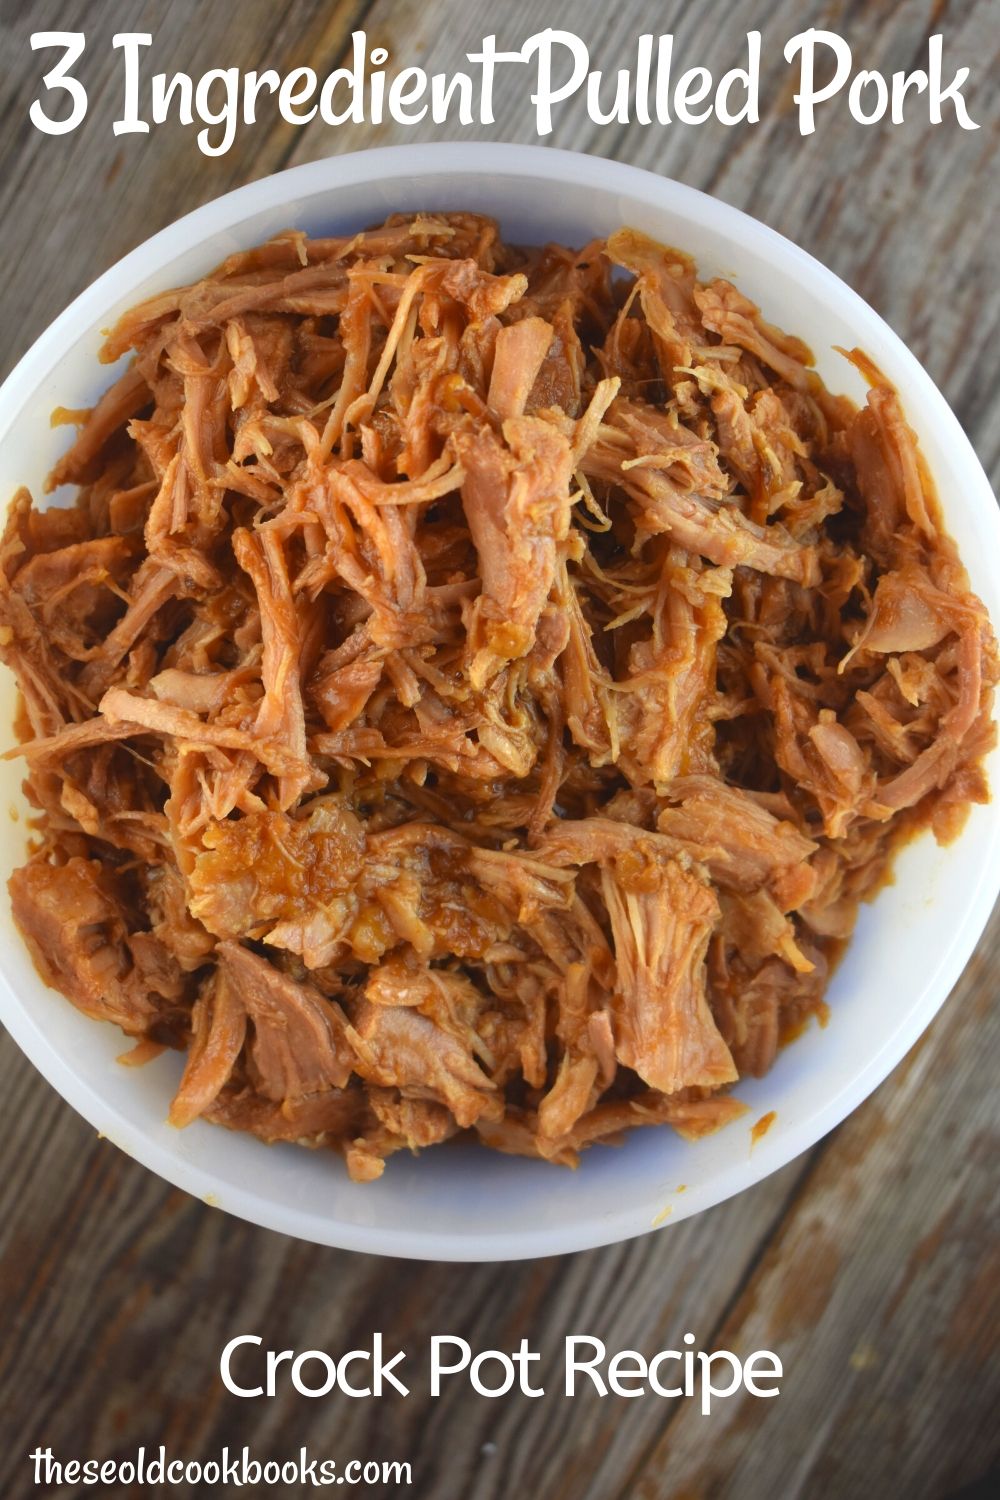 Quick Crock Pot Pulled Pork – An Easy Ingredients Recipe